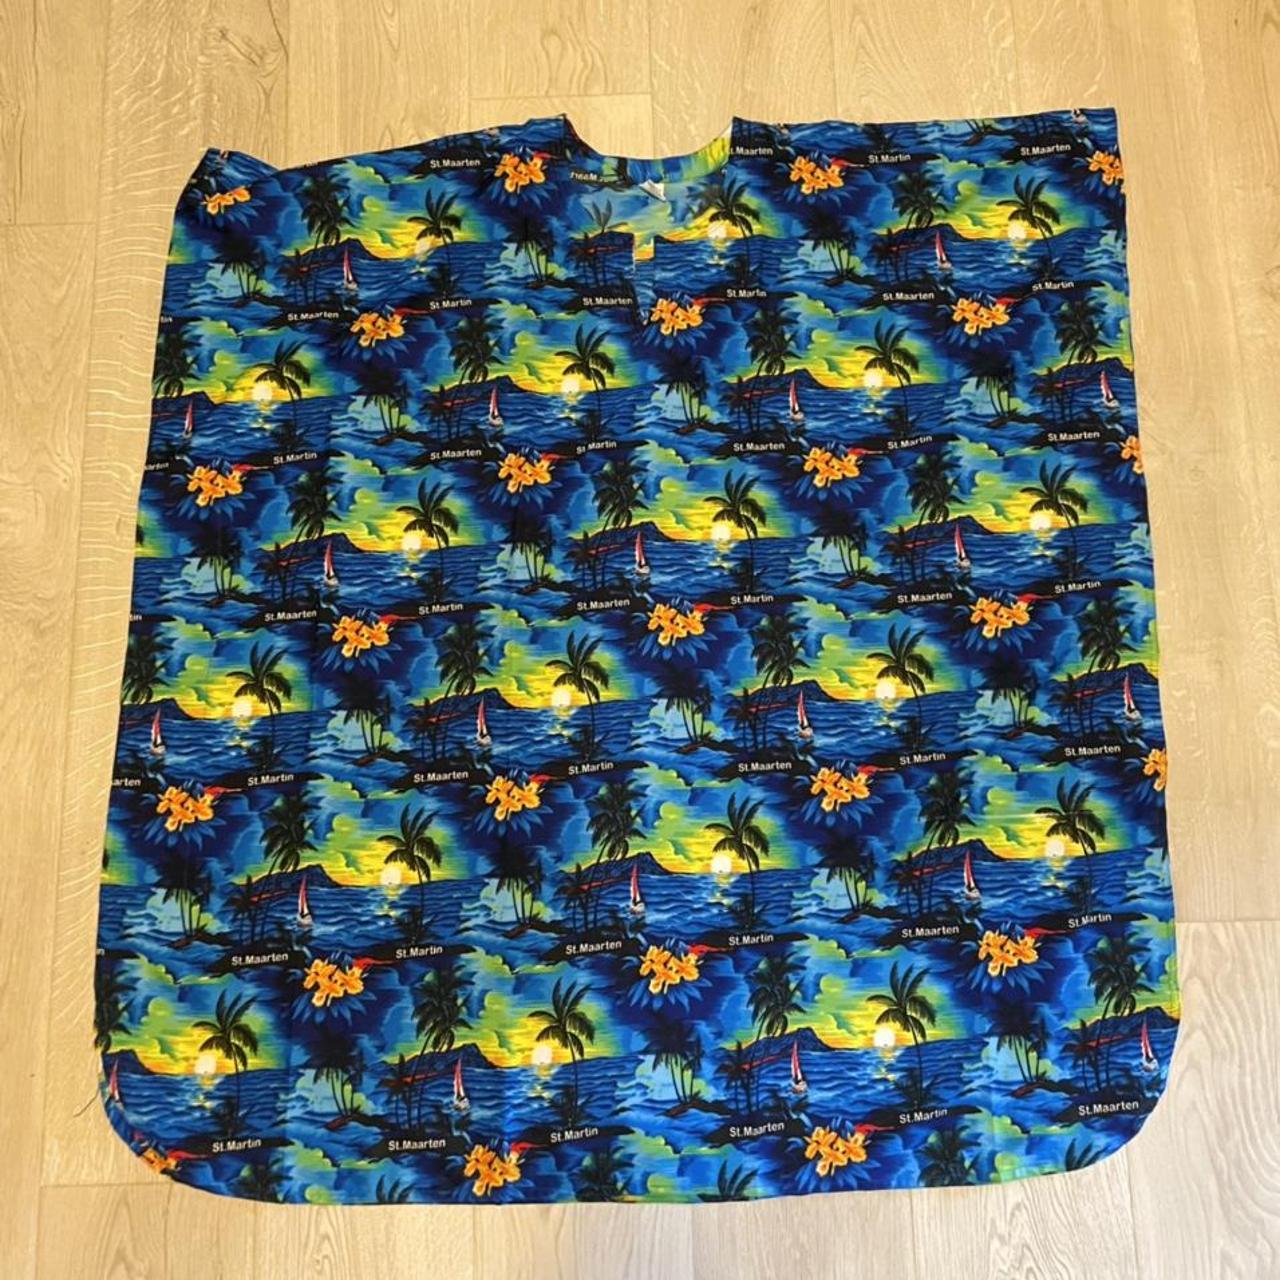 Product Image 1 - ST MARTENS PONCHO

#tropical #beach #islands